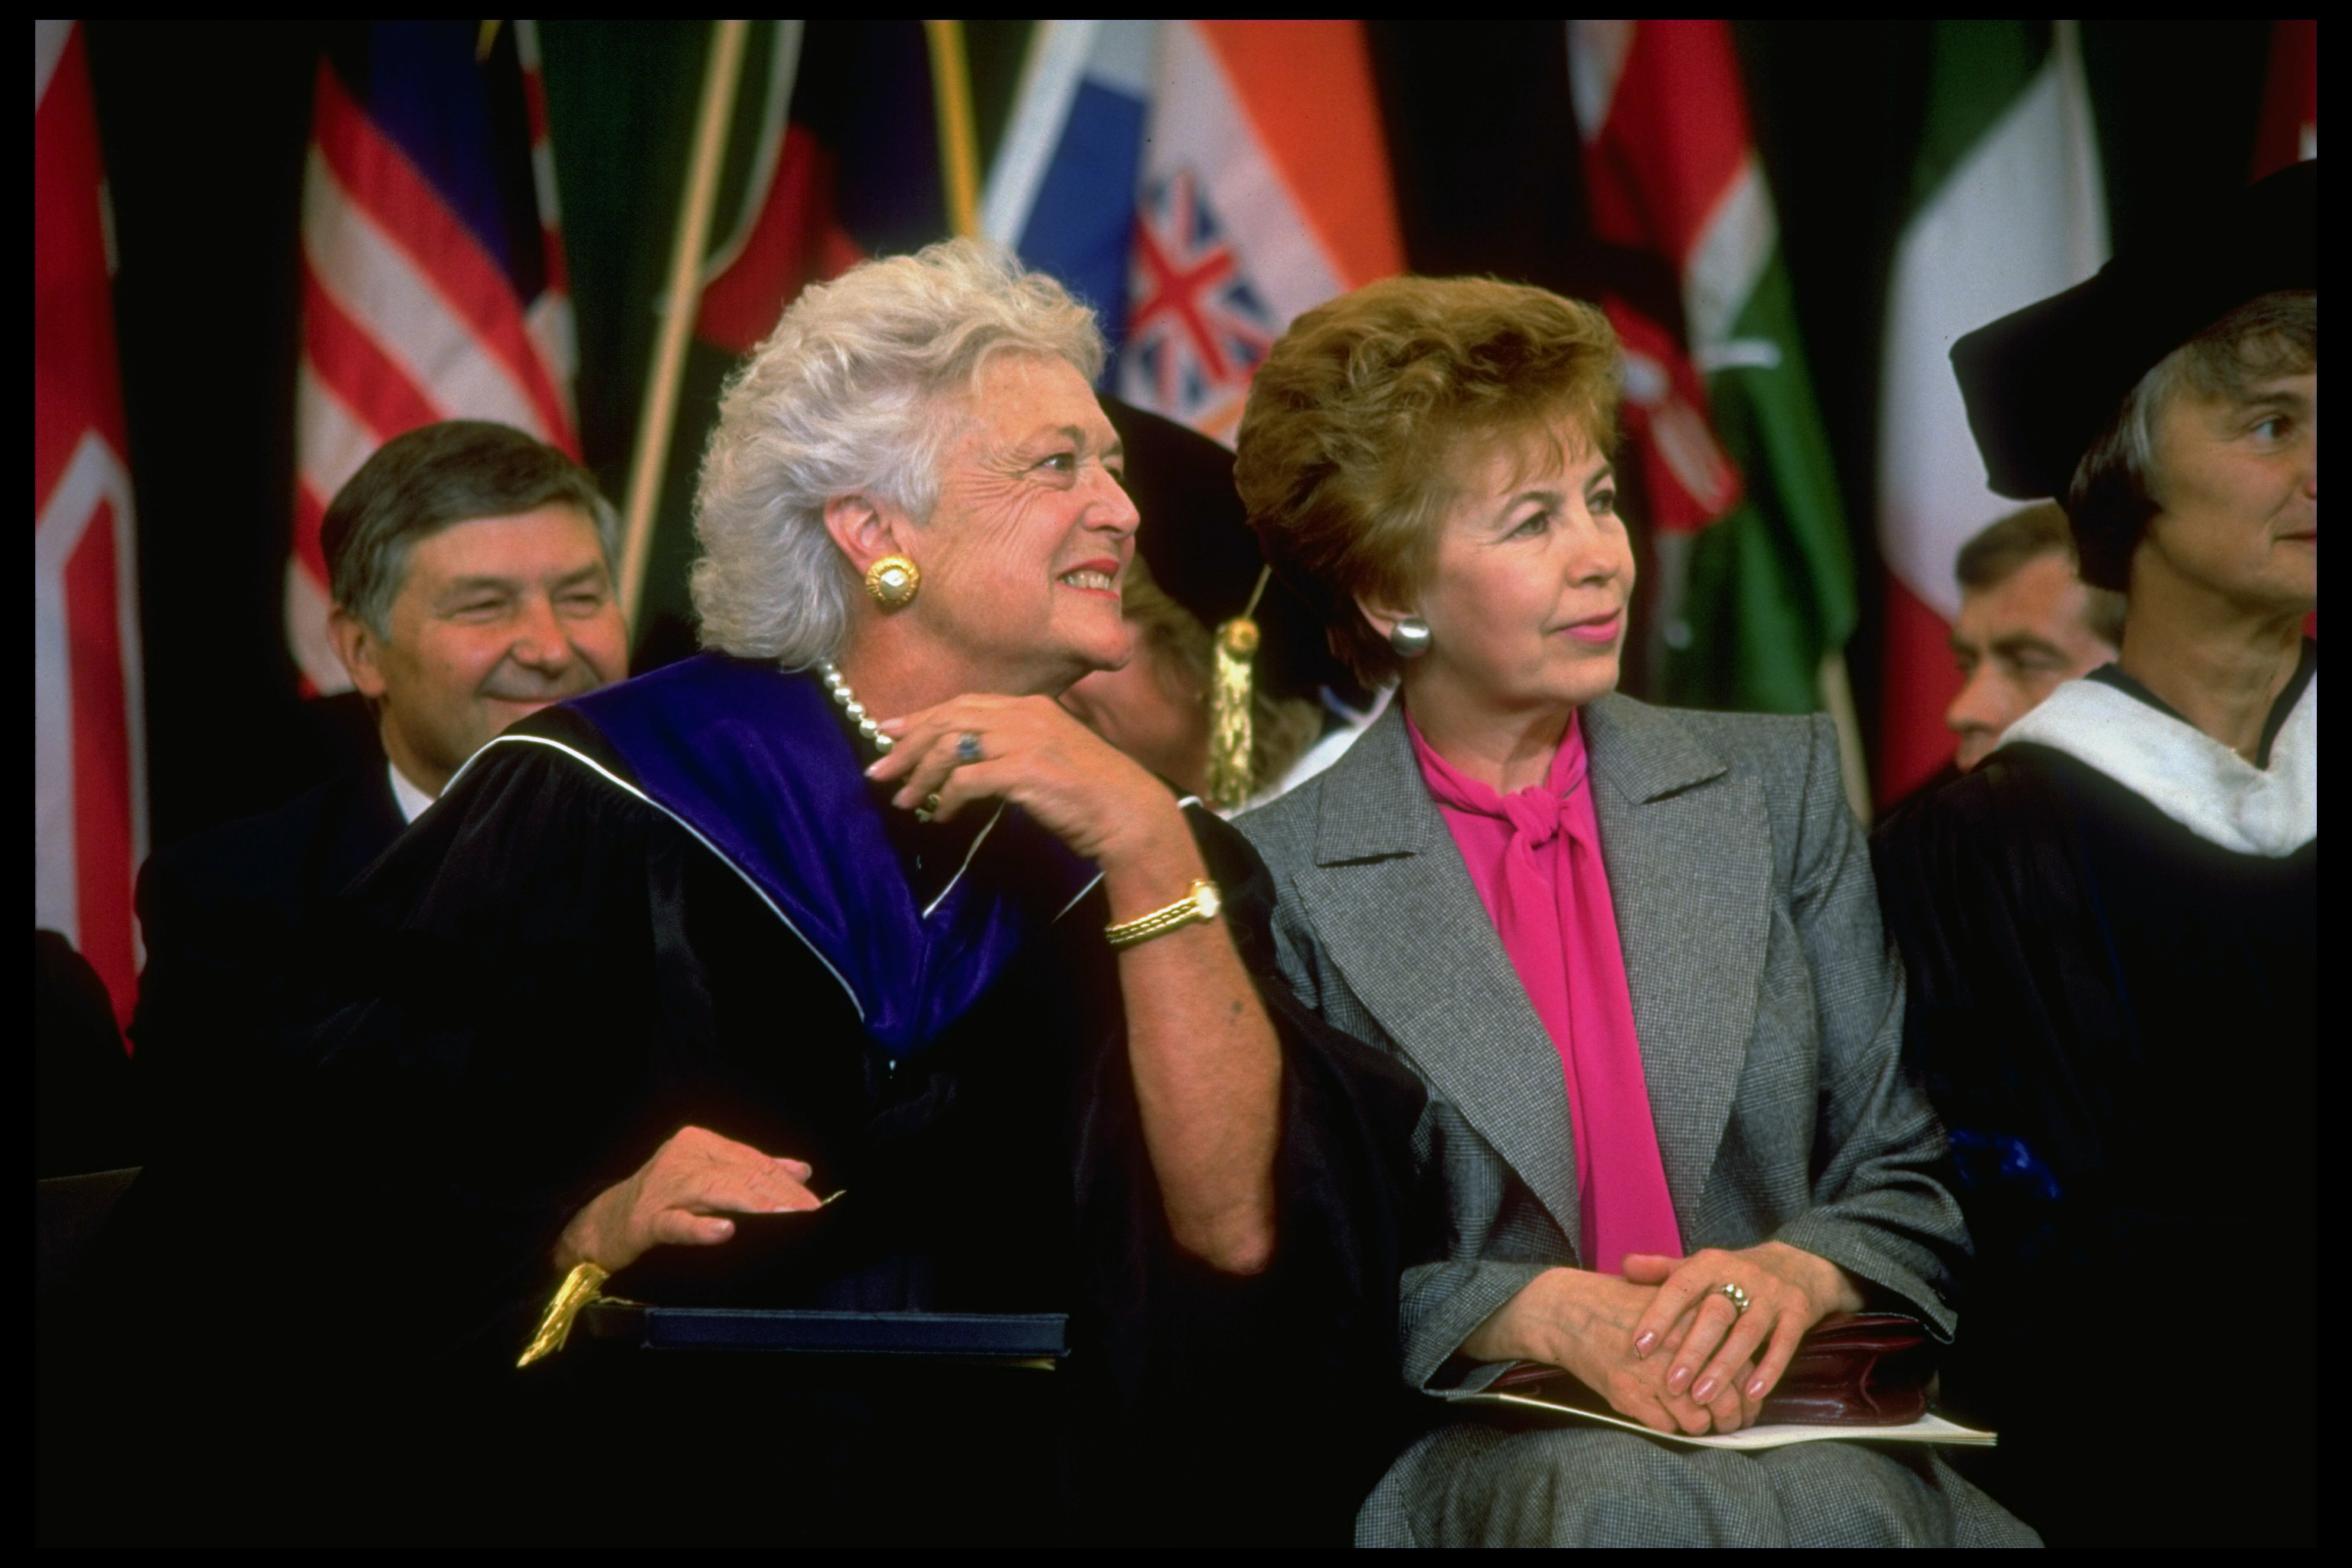 Barbara Bush and Raisa Gorbachev at Wellesley College graduation exercises in 1990. (Cynthia Johnson—The LIFE Images Collection/Getty)